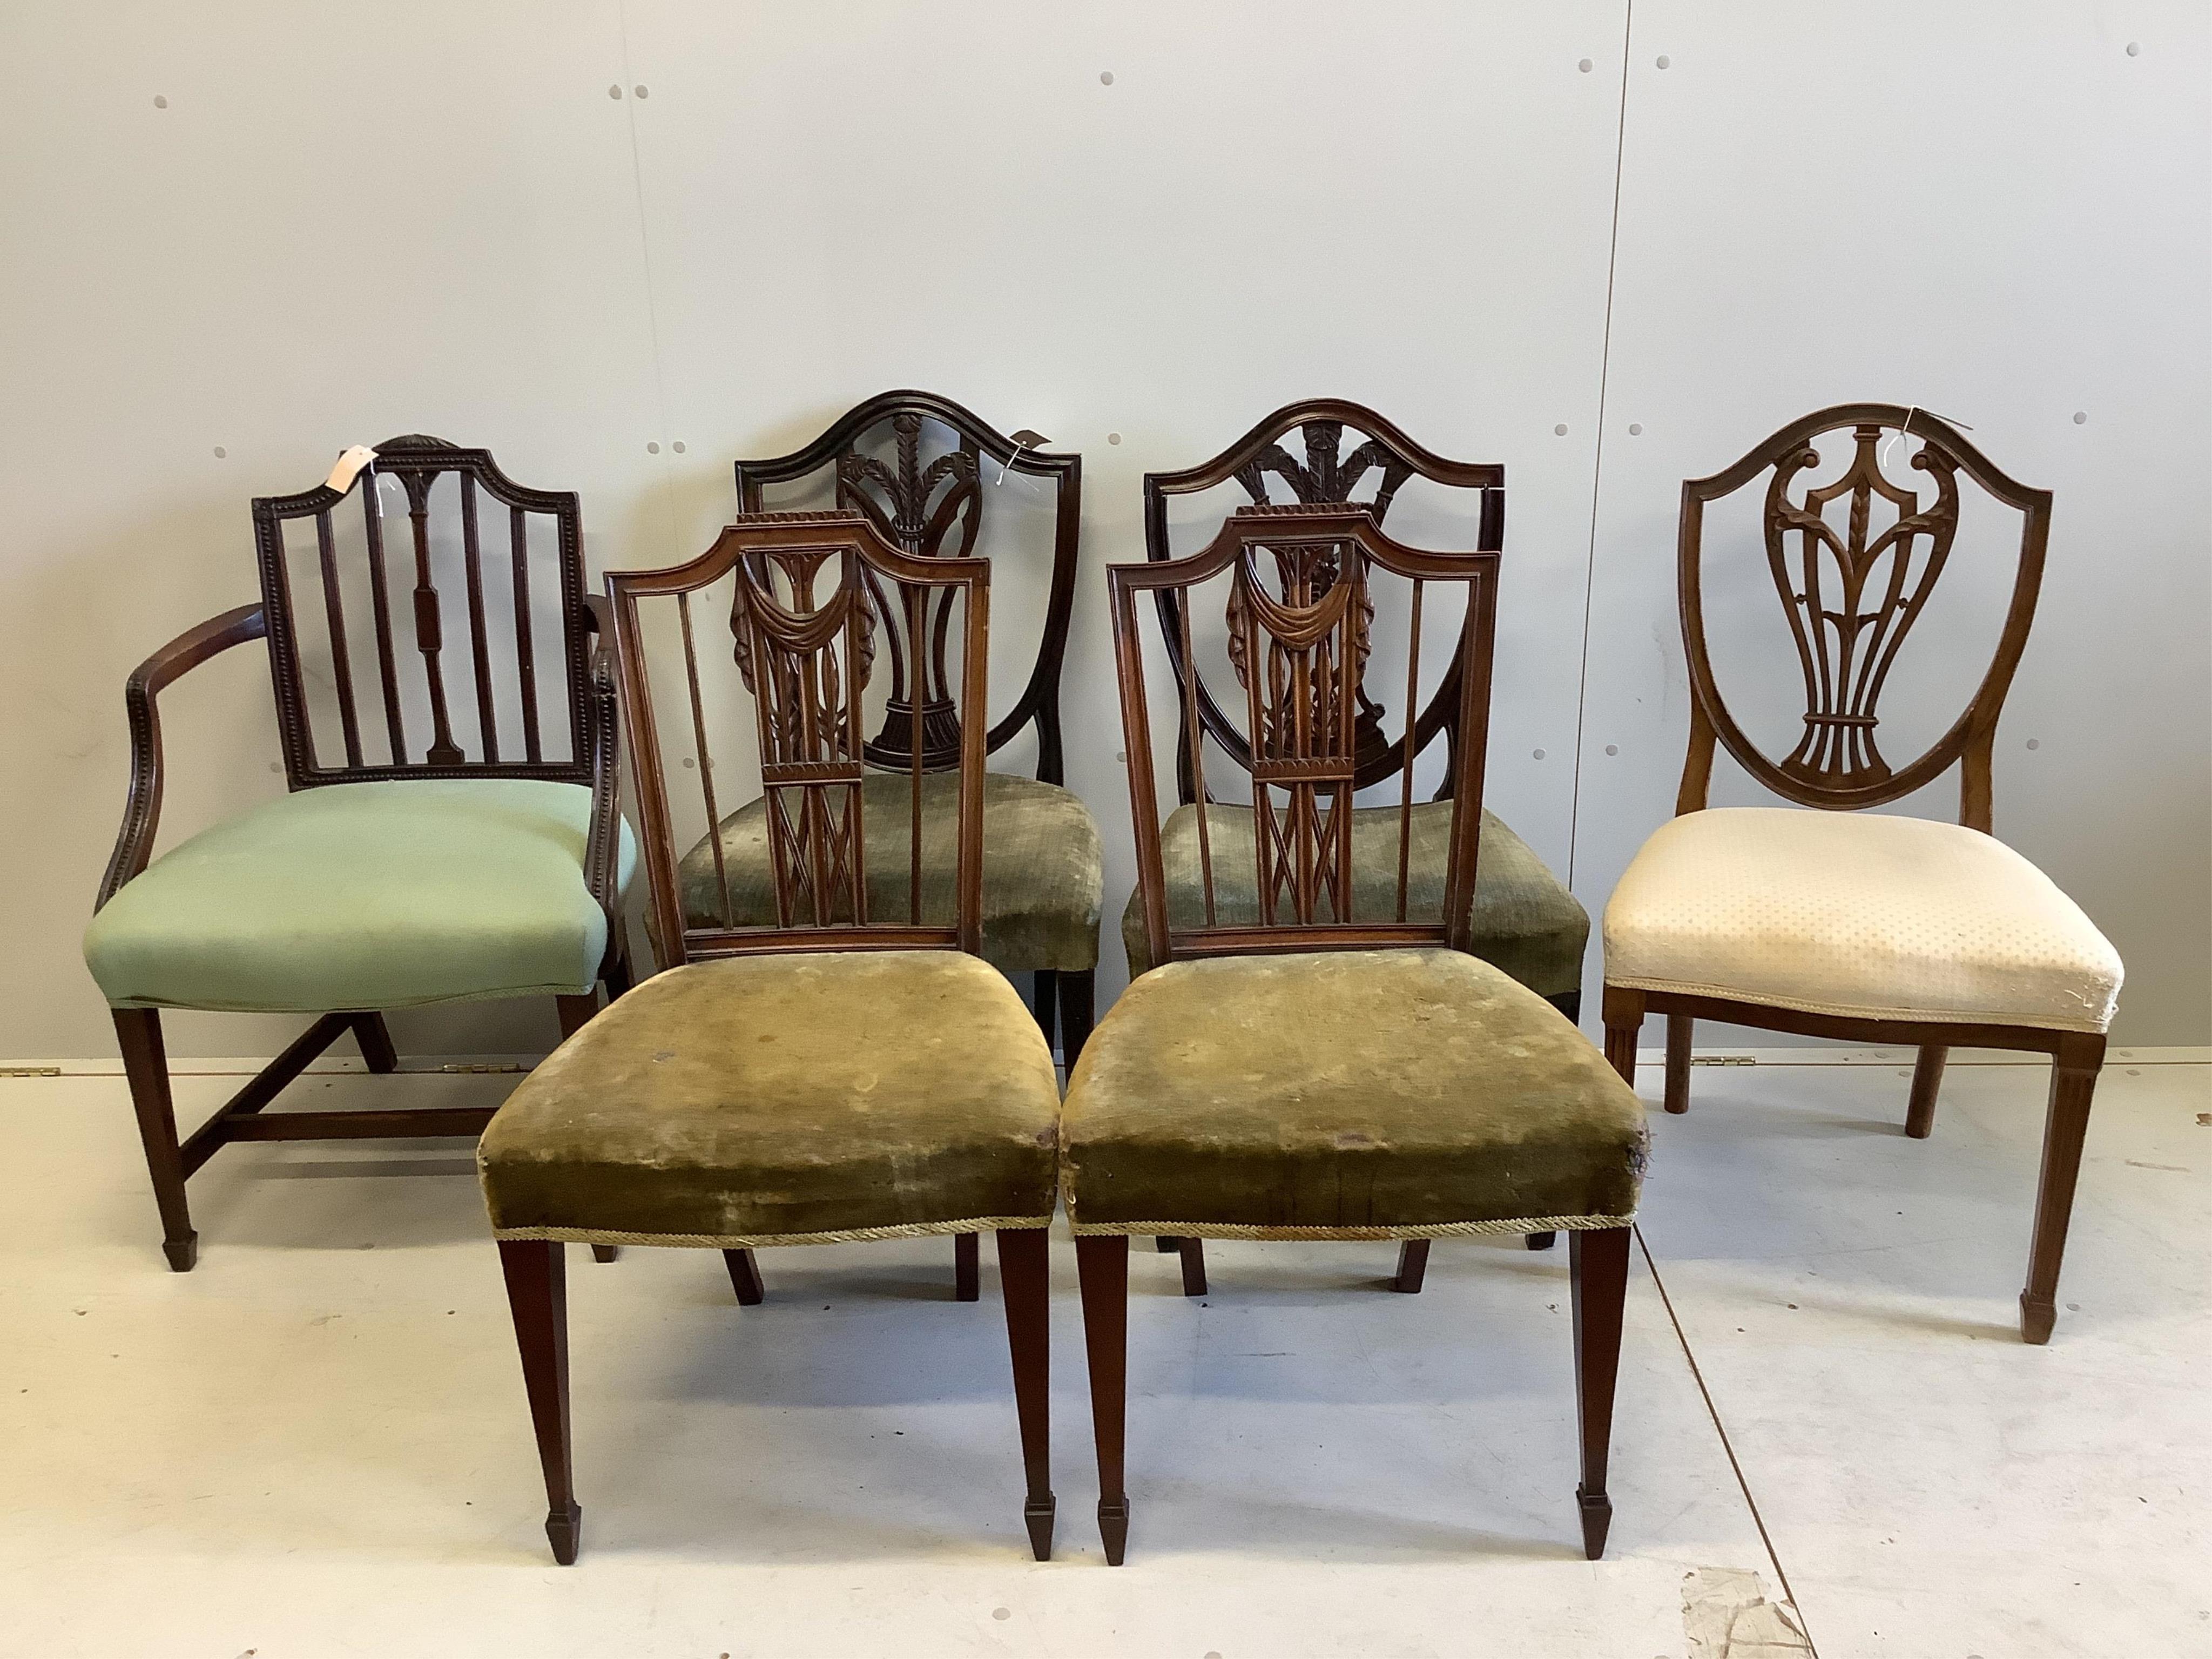 Two Hepplewhite period mahogany dining chairs, a 19th century Sheraton design elbow chair, a pair of